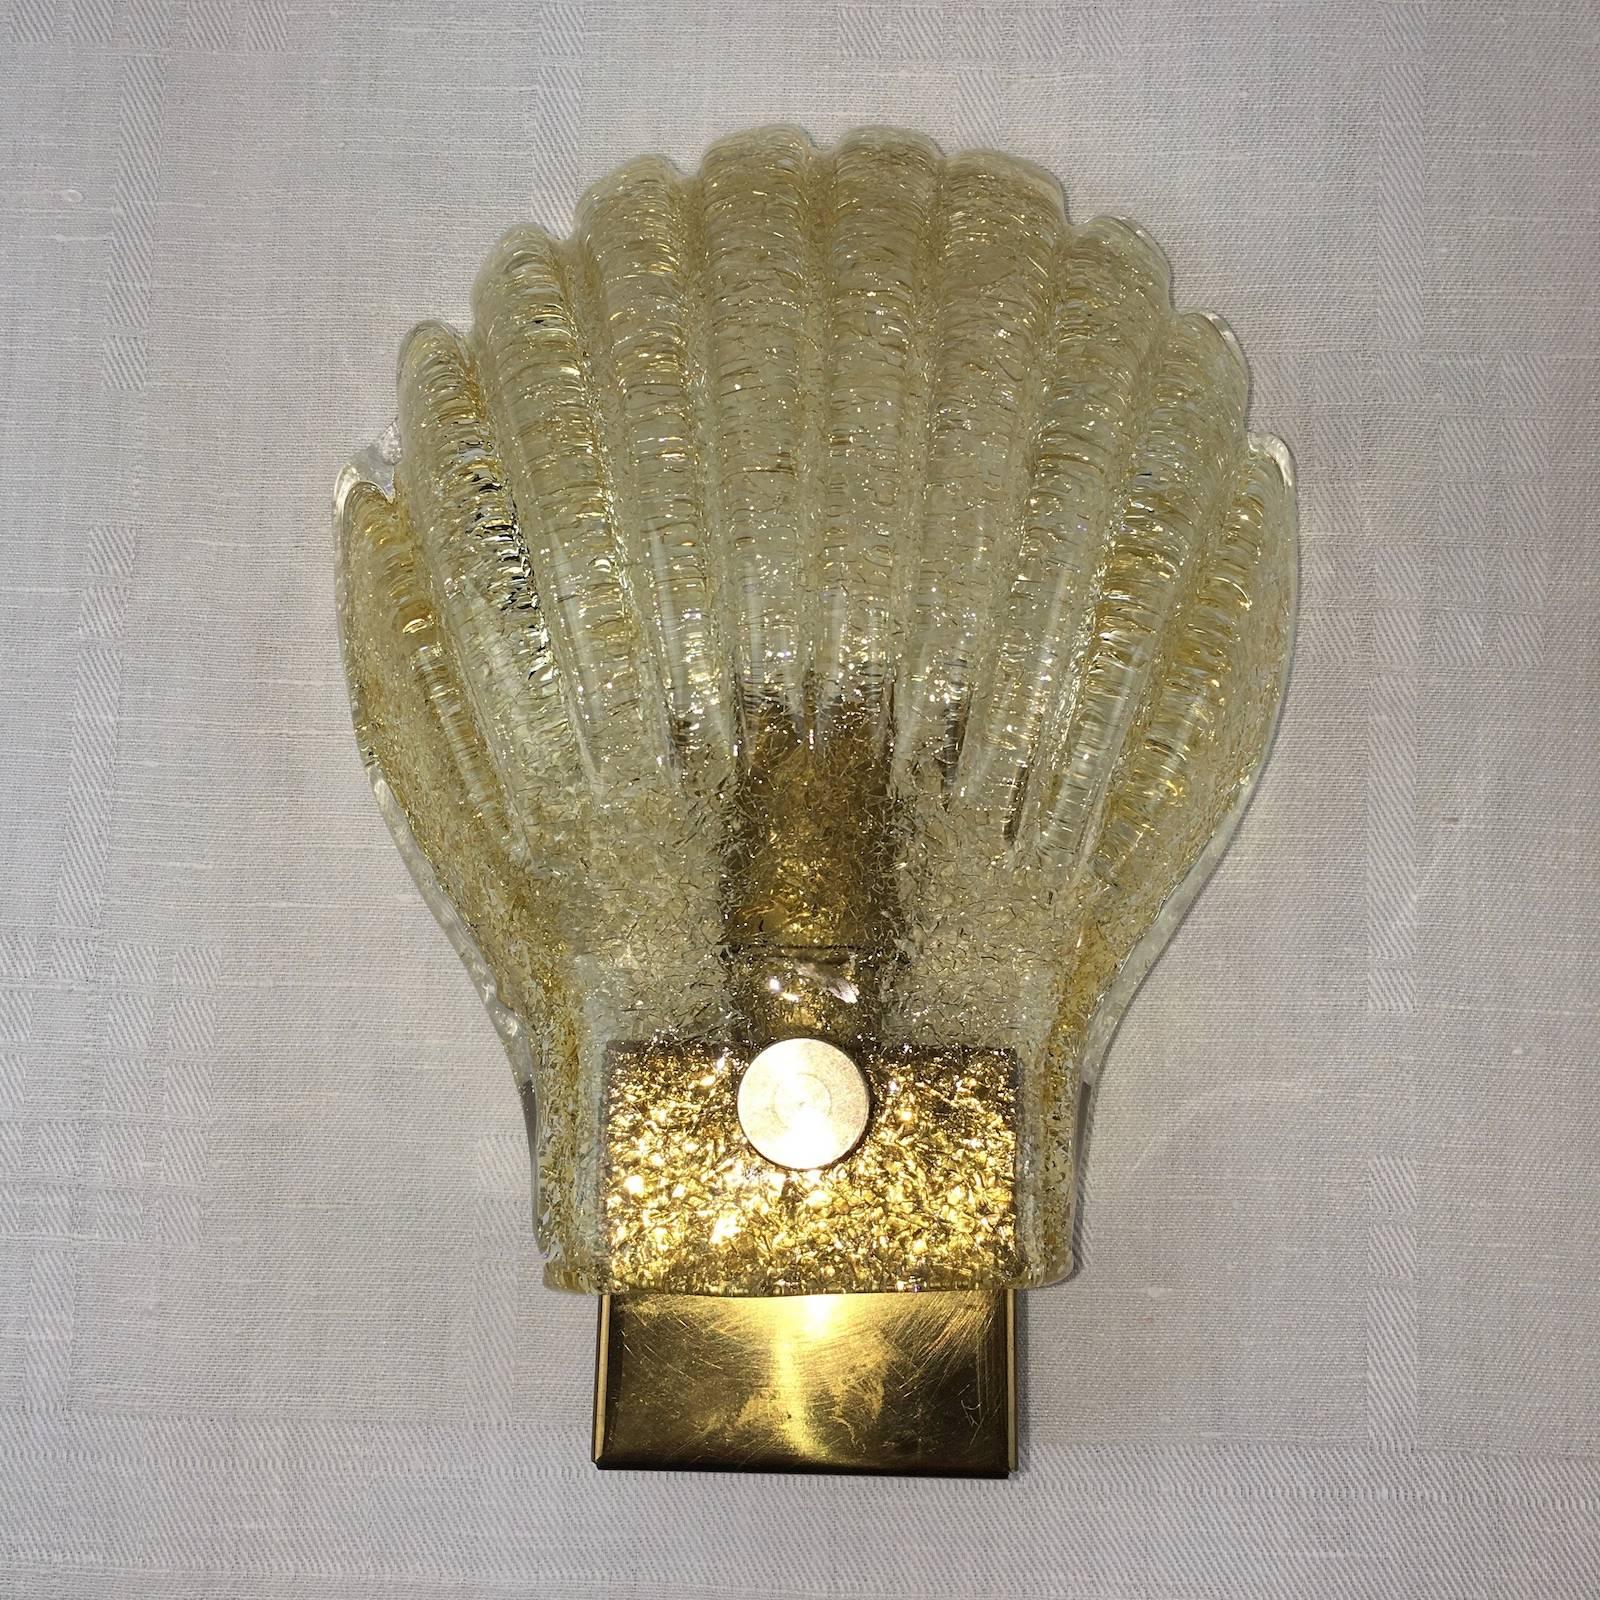 Italian Pair of Sea Shell Pattern Modernist Murano Glass Sconces - ON SALE For Sale